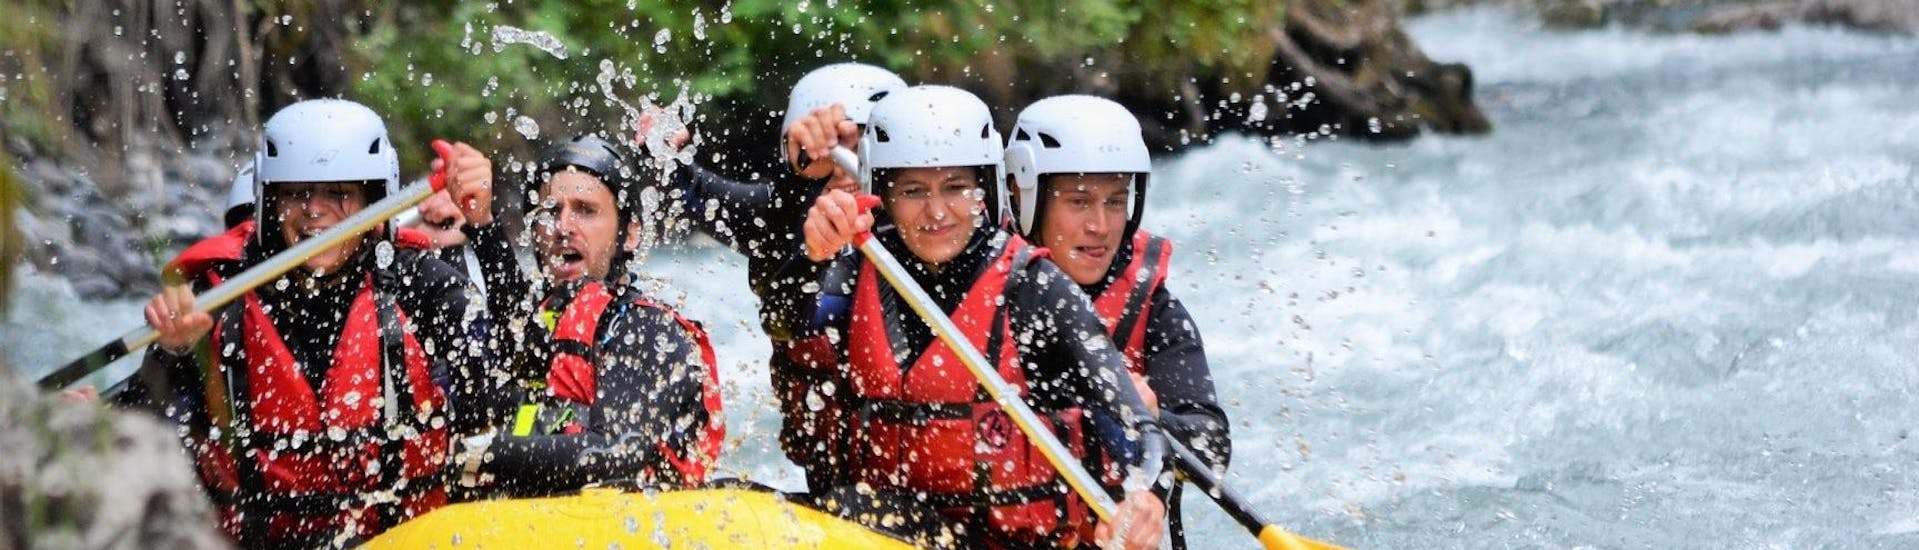 A group of friends is paddling in the rapids of the Giffre River where Raft Rider offers rafting tours in Haute-Savoie near Samoens.